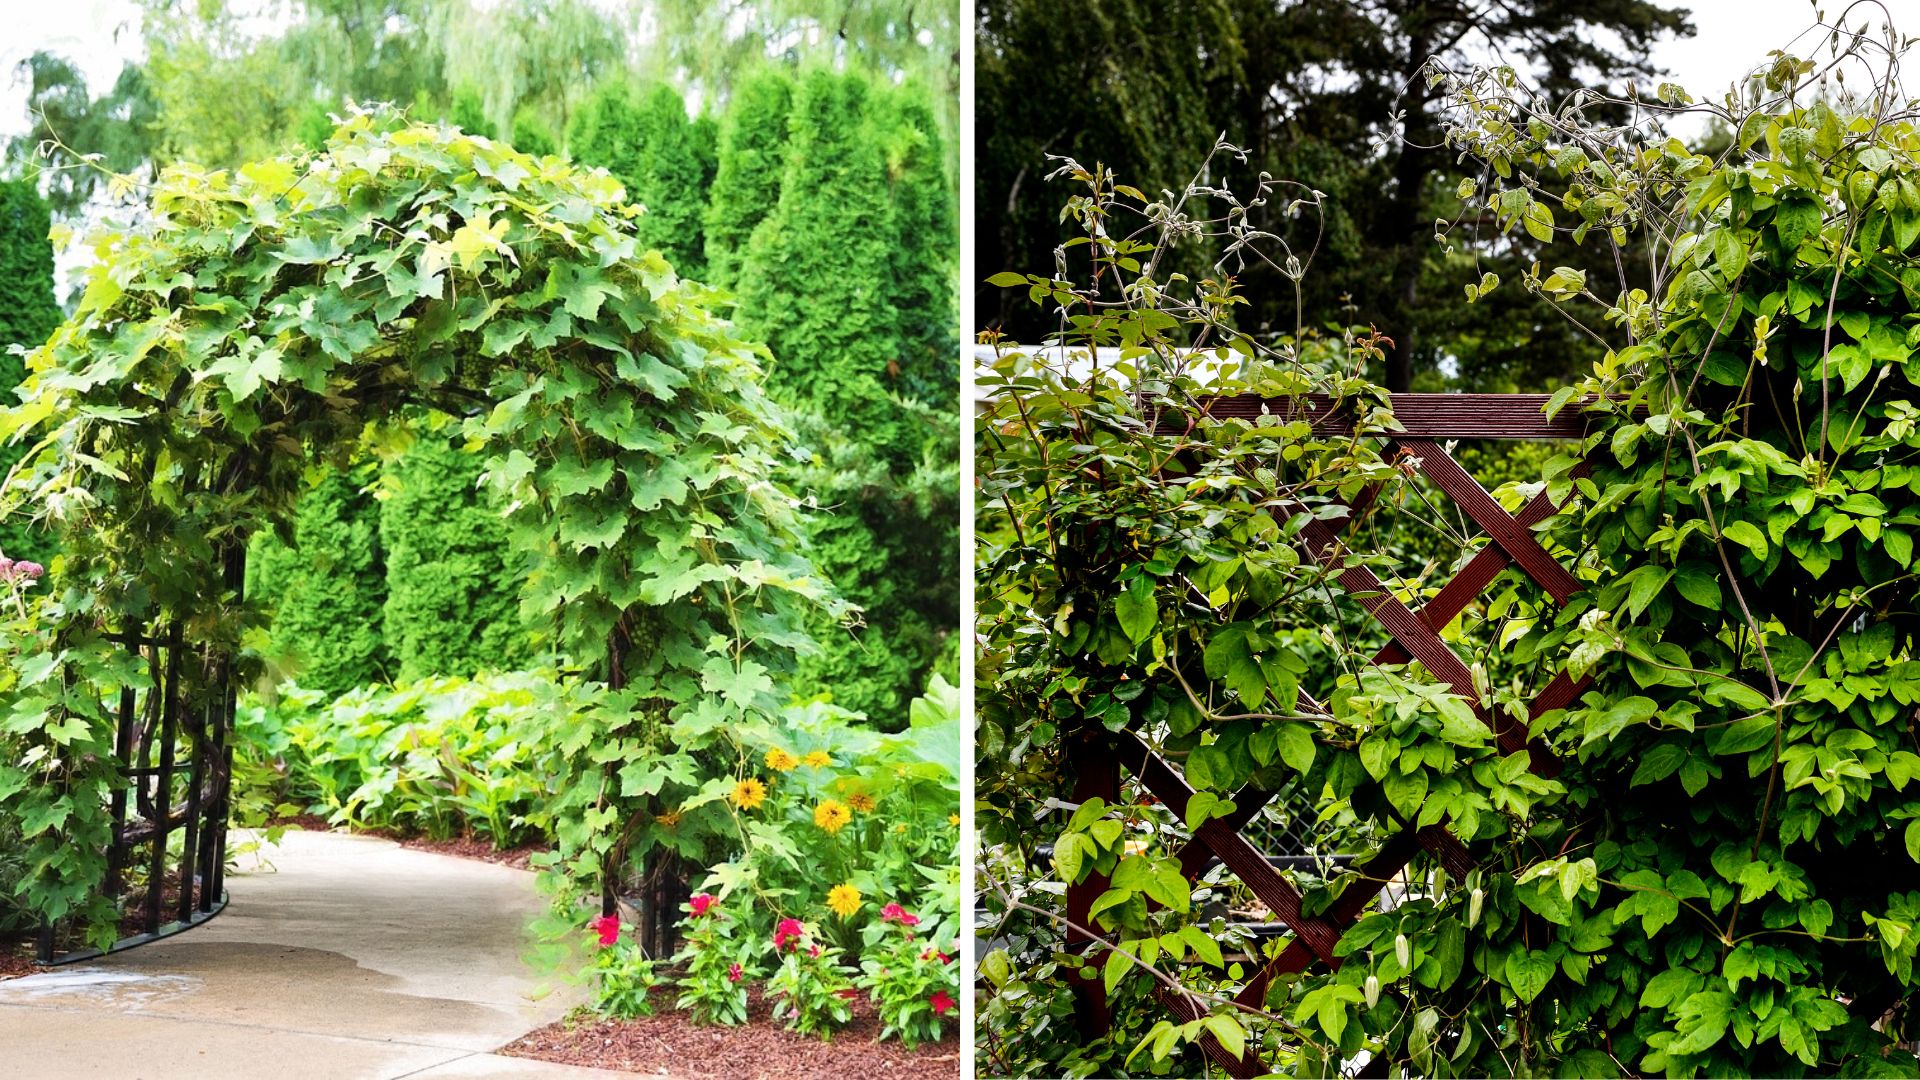 This is how you make your own trellis – perfect for climbing plants